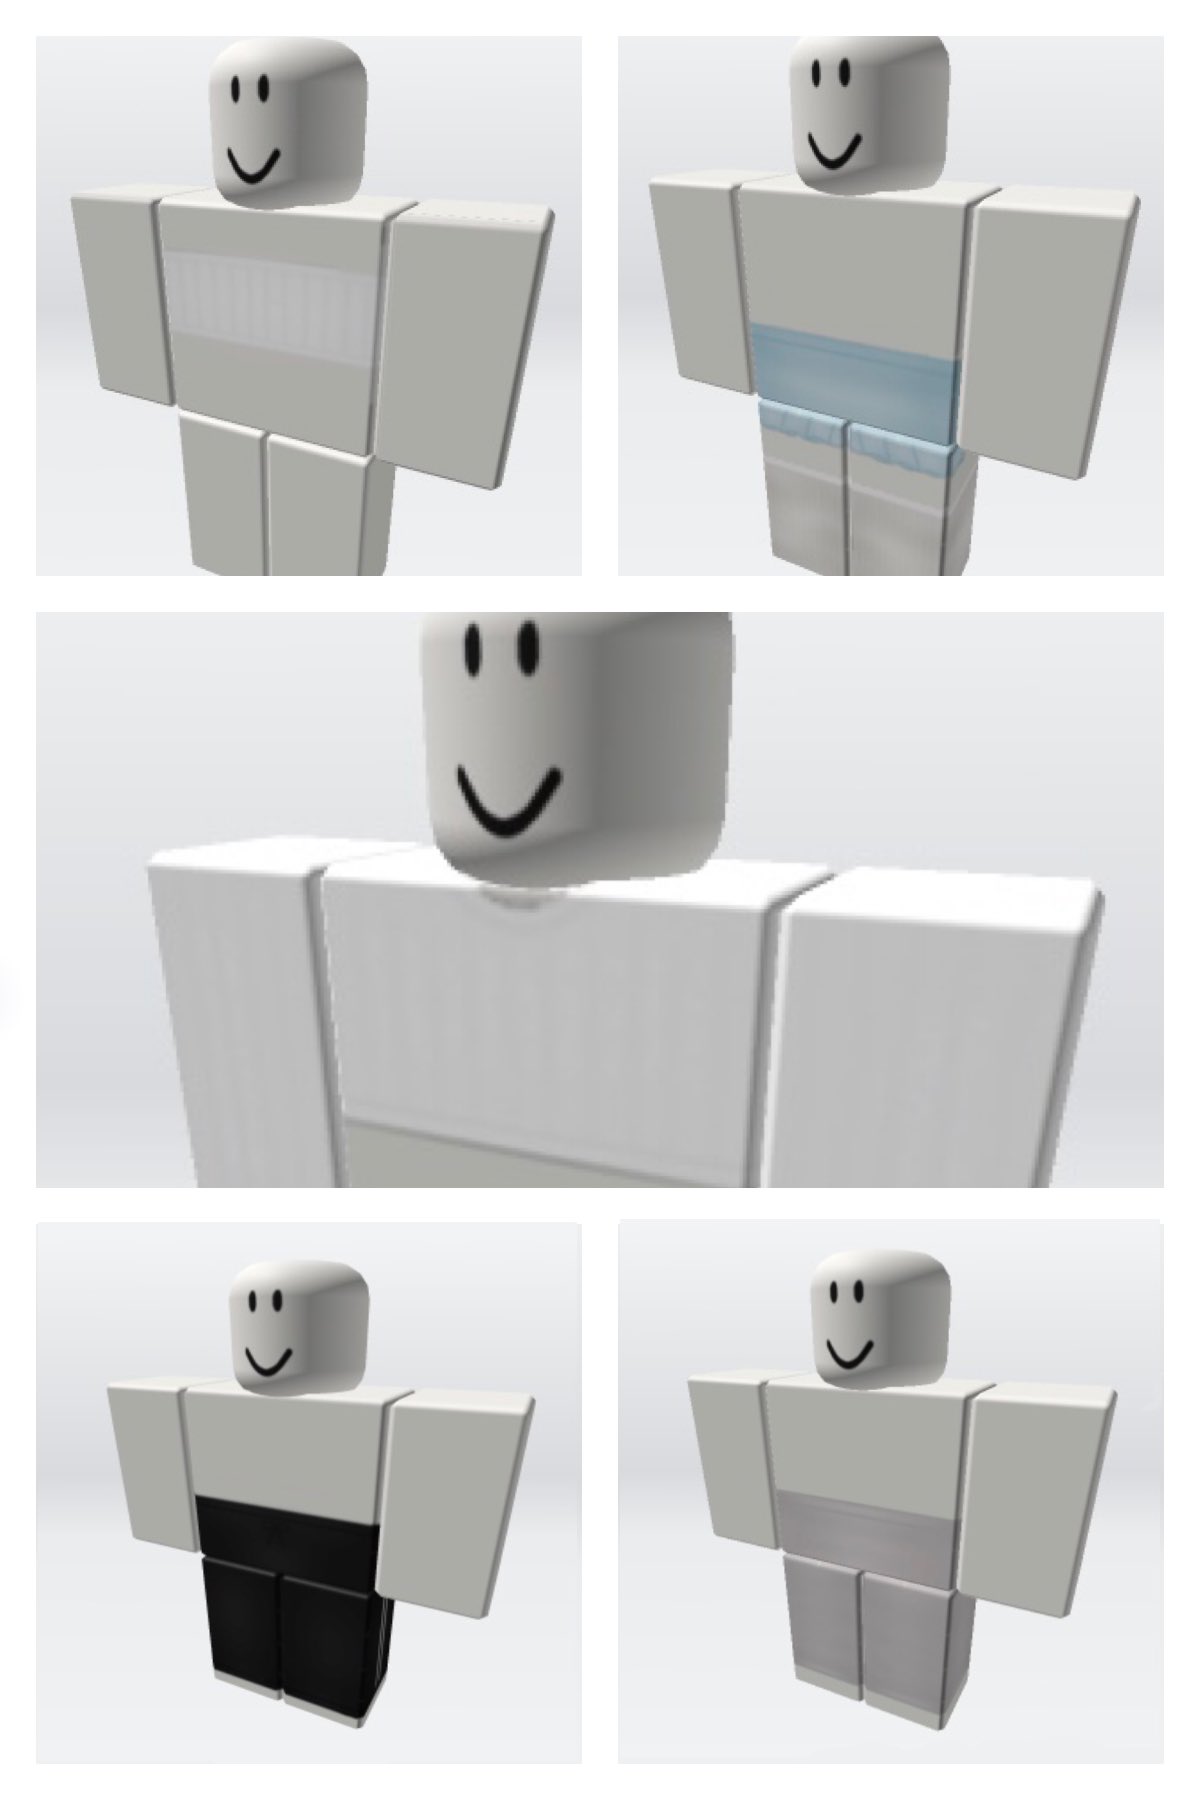 White and Gray Shirt  Pants Preview ROBLOX by Xinathz on DeviantArt